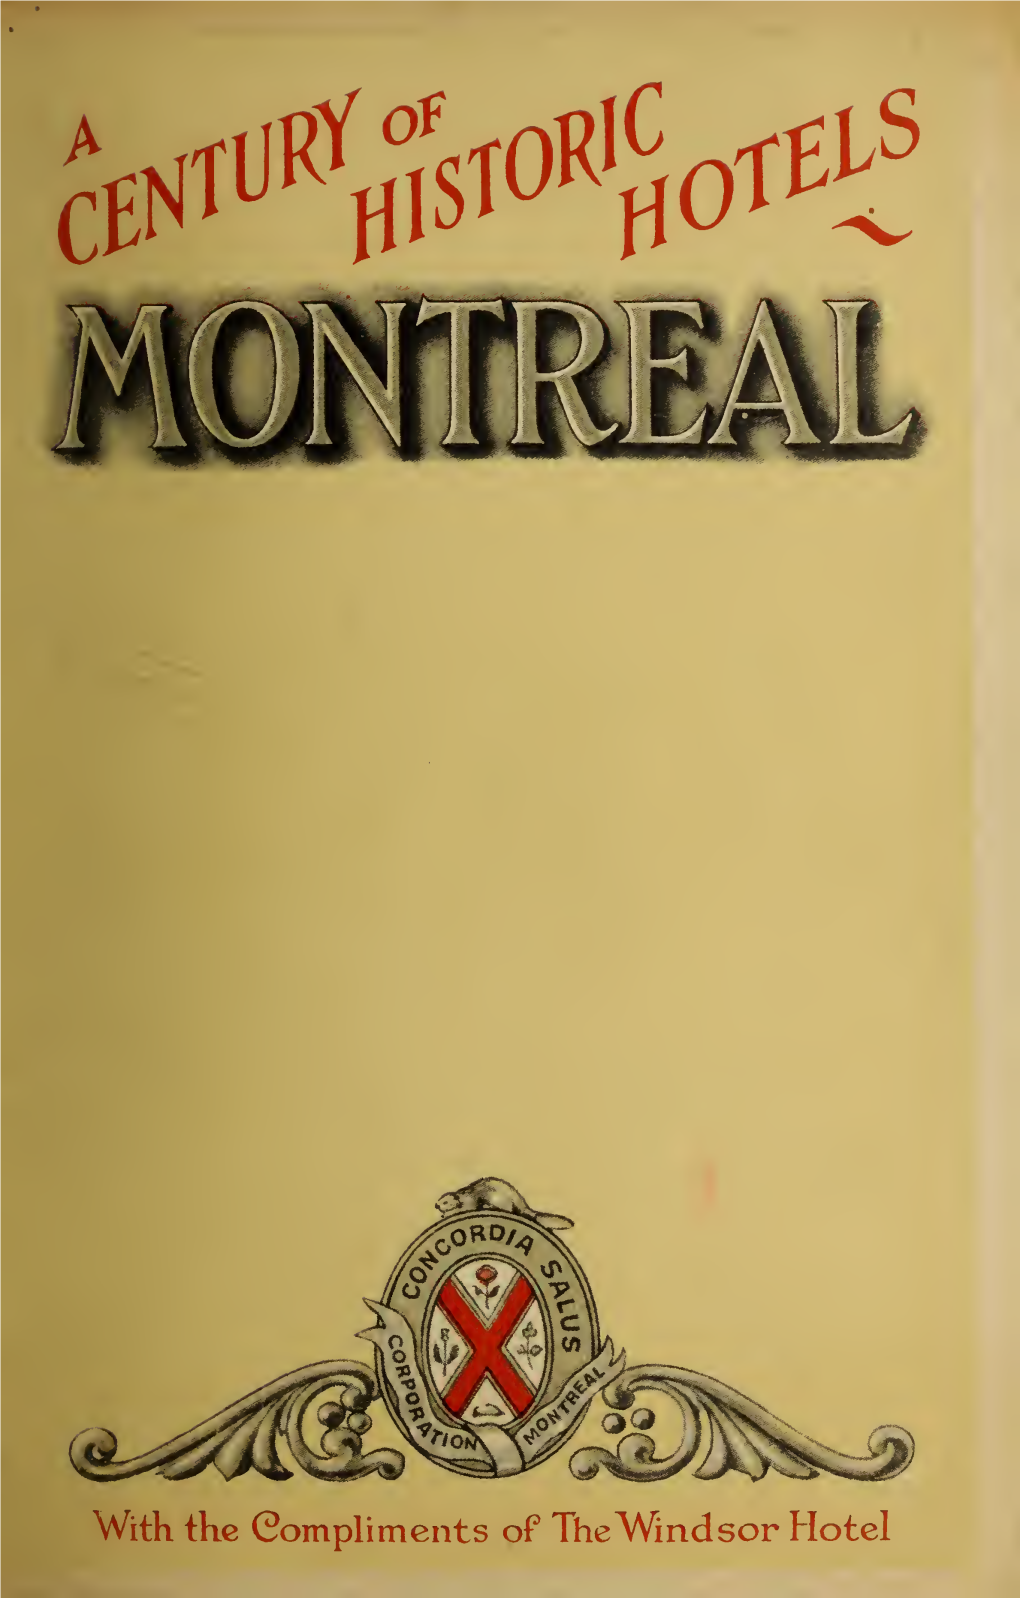 Century of Historic Hotels, Montreal